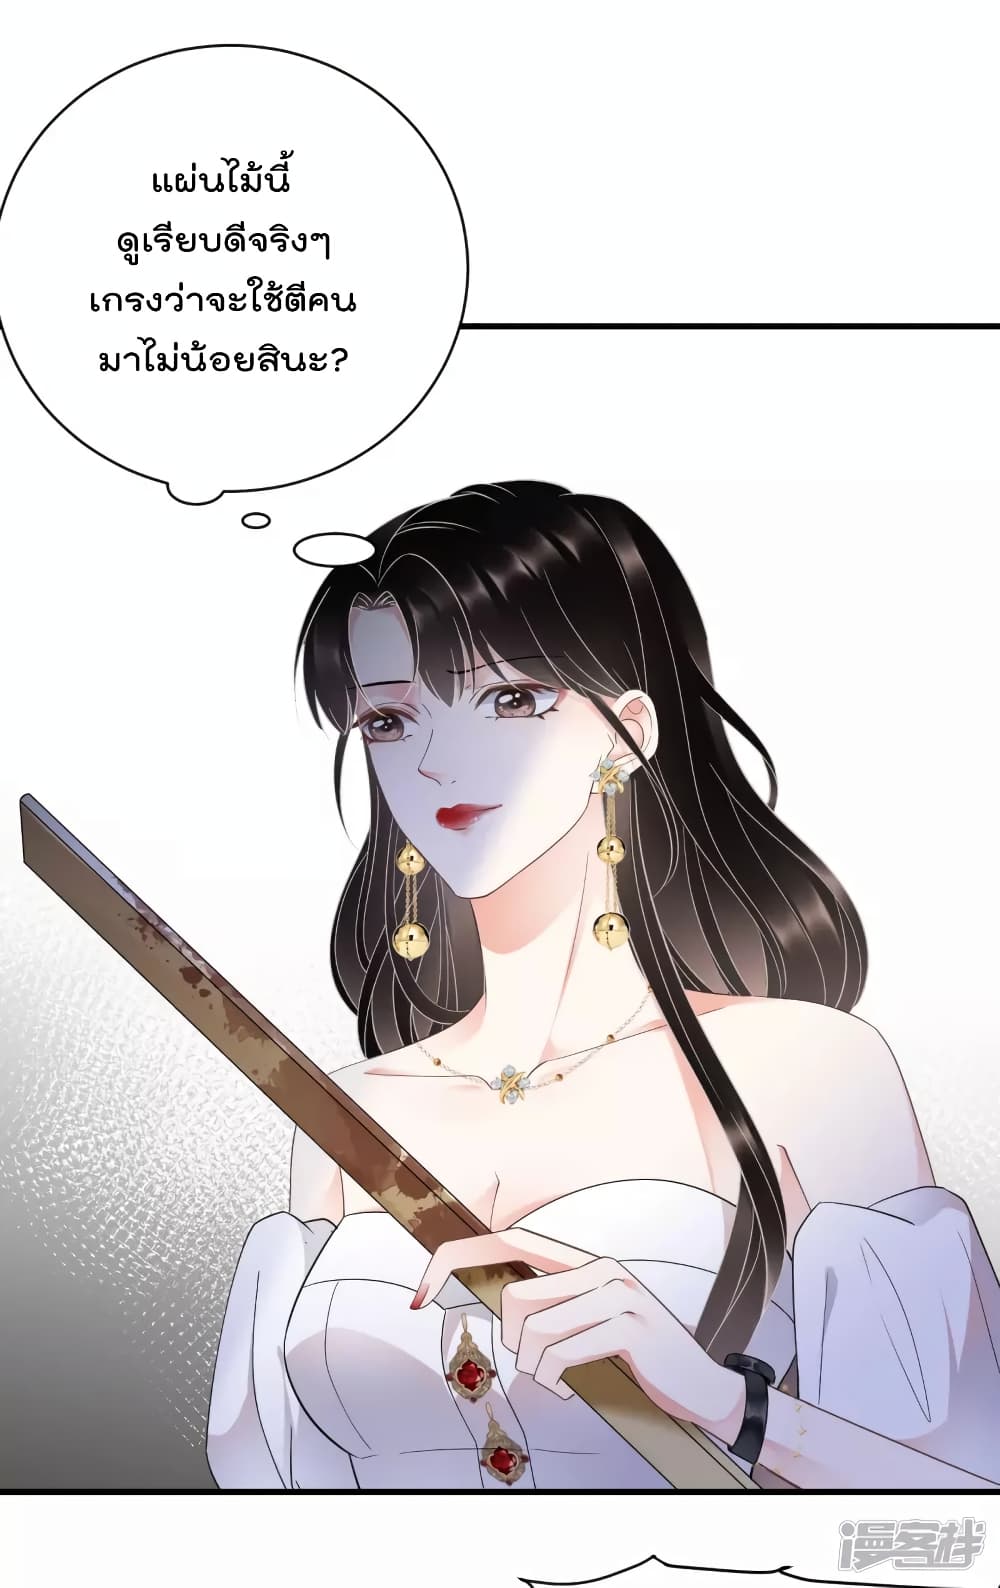 What Can the Eldest Lady Have คุณหนูใหญ่ ทำไมคุณร้ายอย่างนี้ 27-27